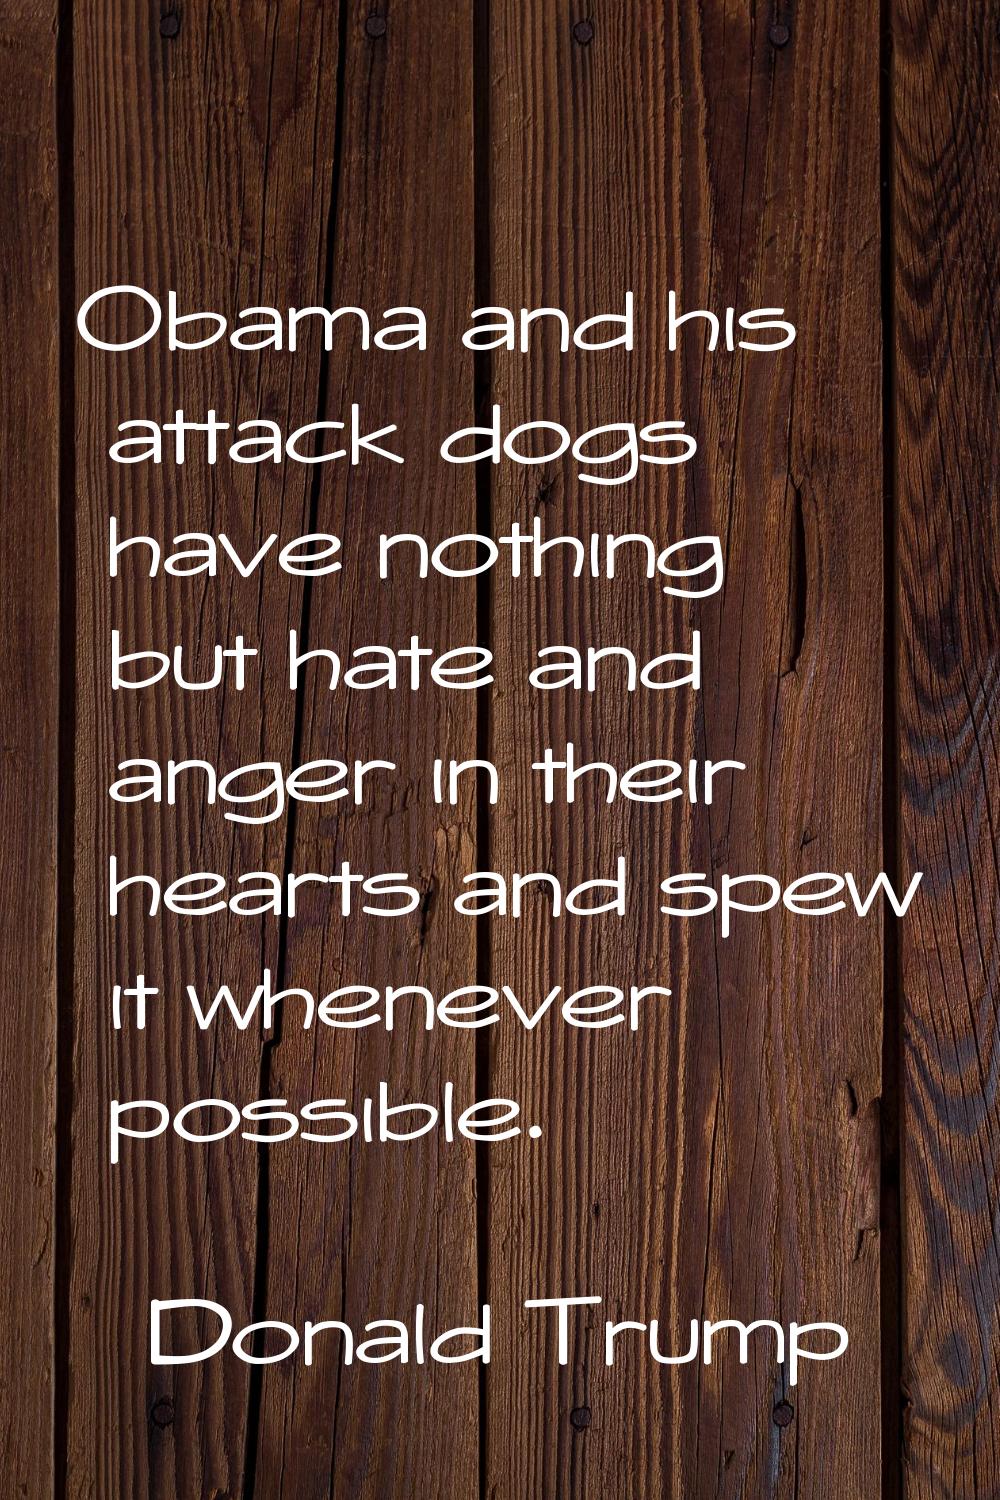 Obama and his attack dogs have nothing but hate and anger in their hearts and spew it whenever poss